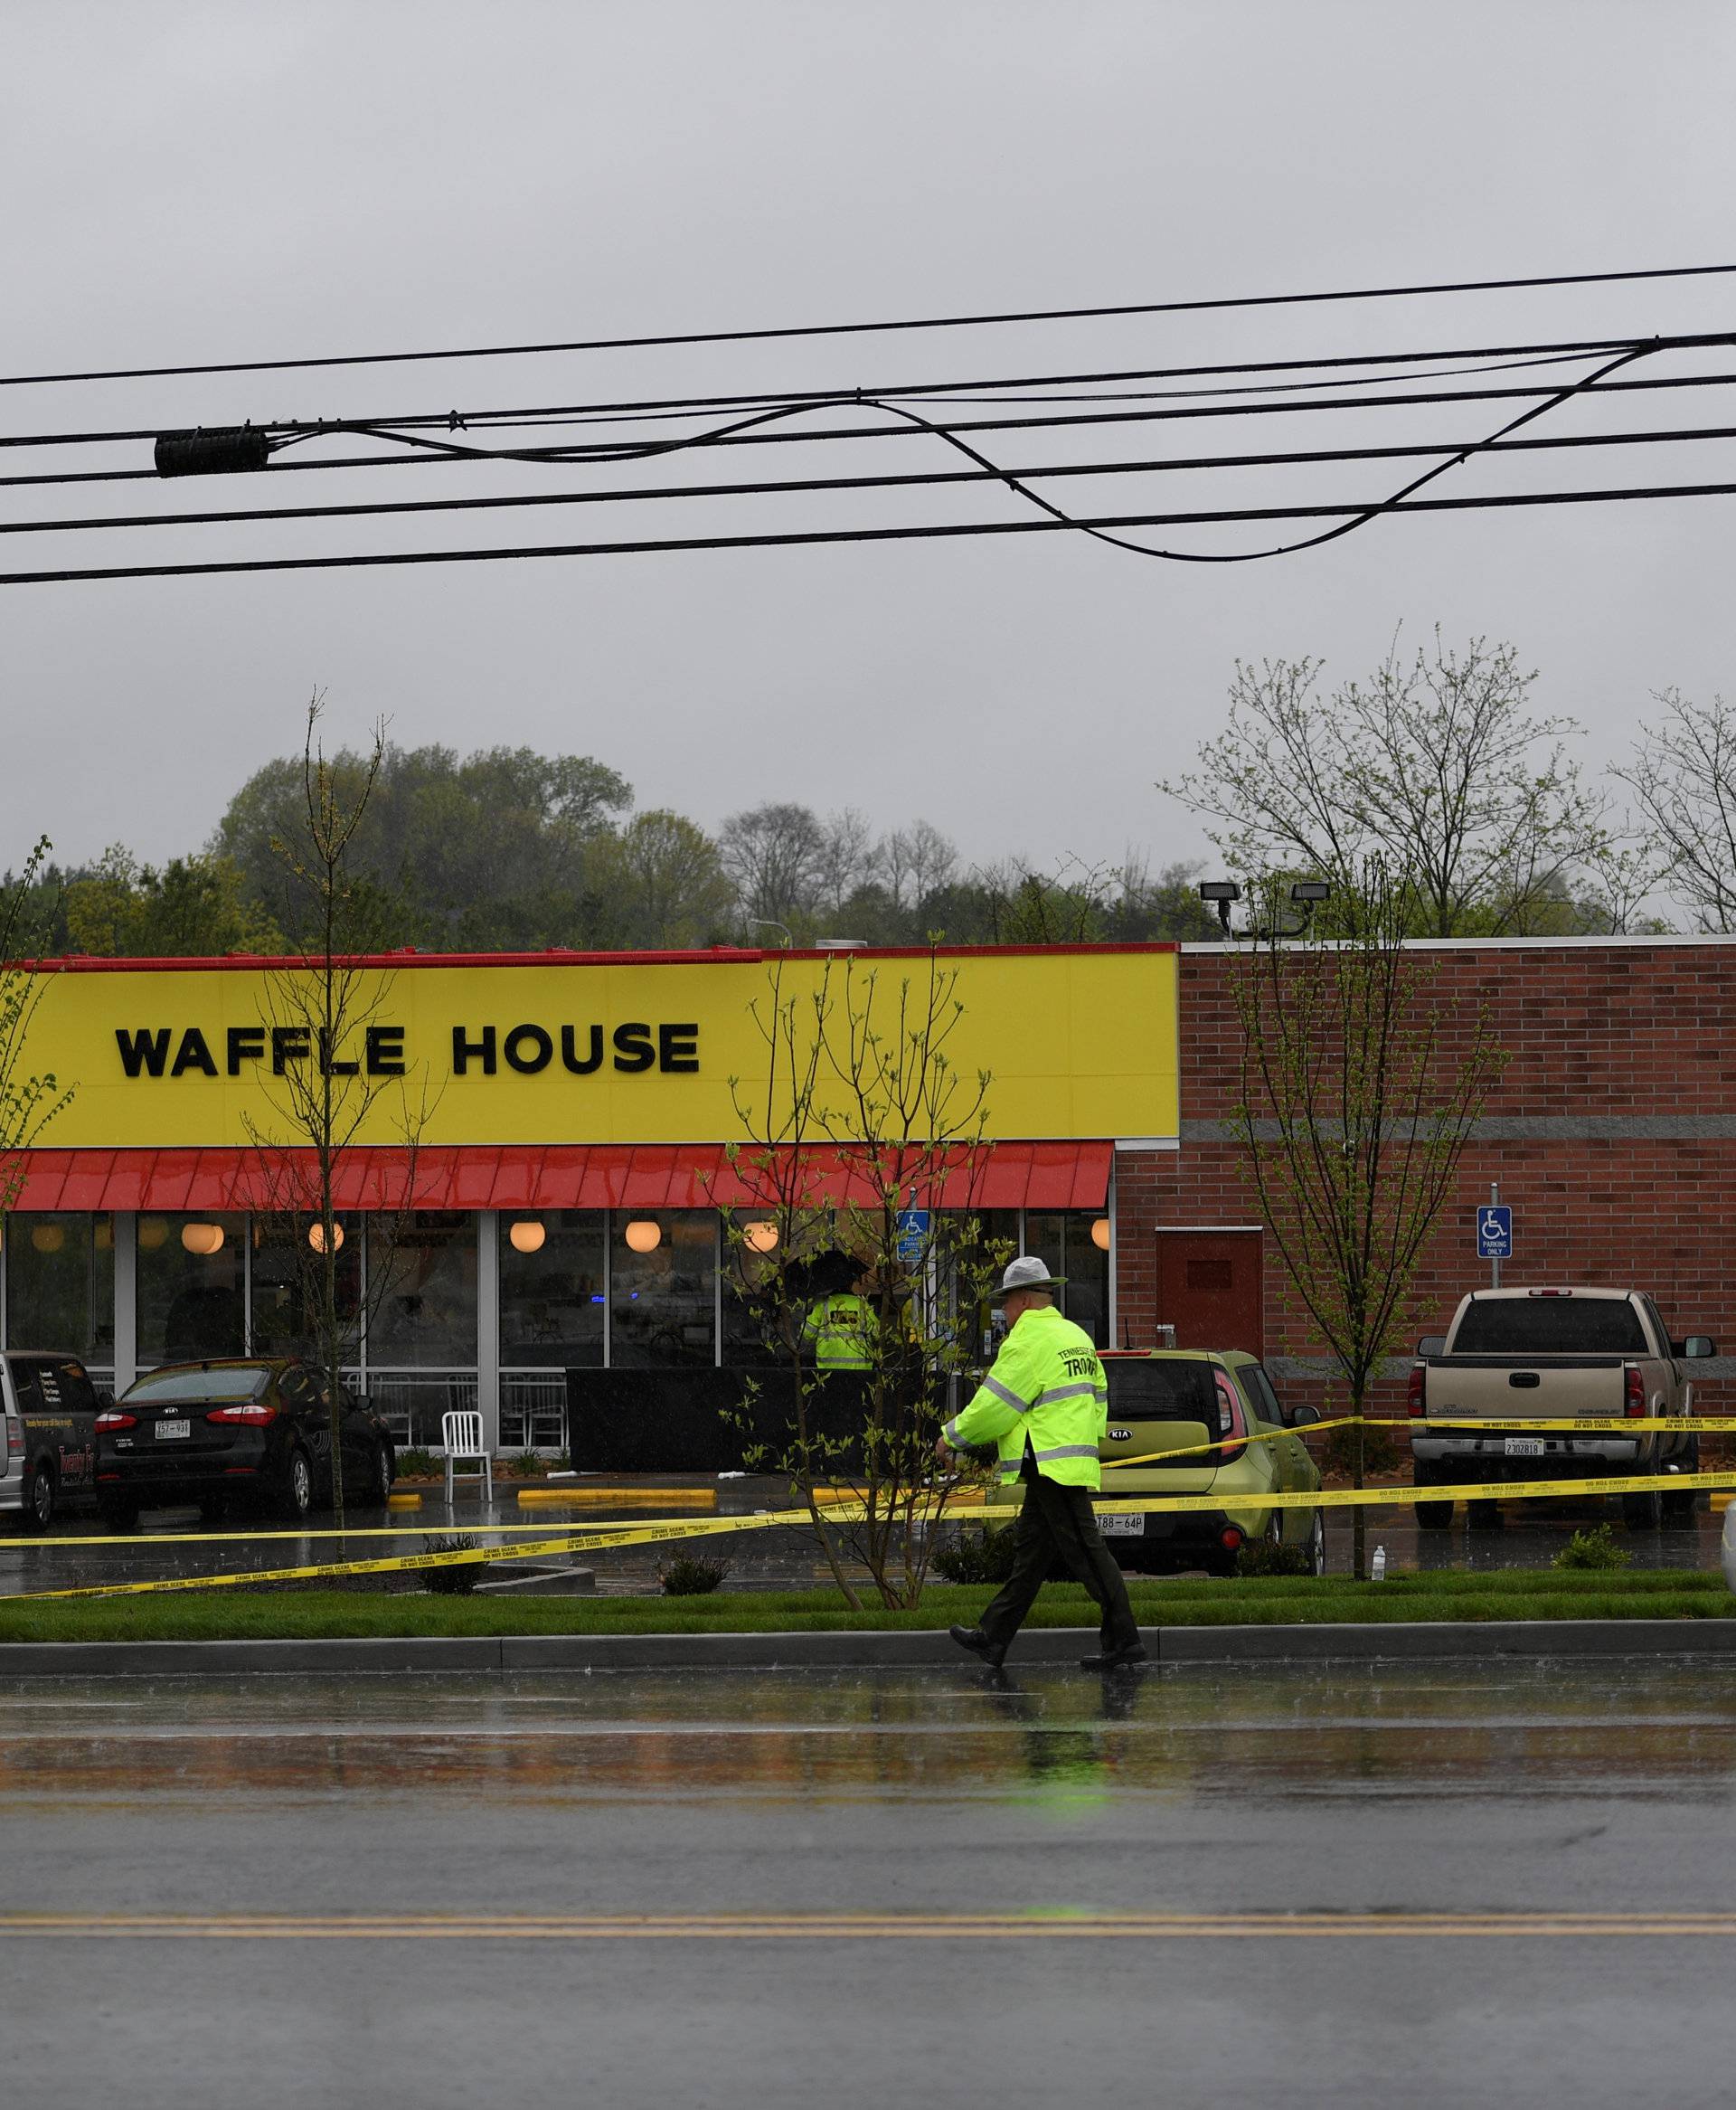 Metro Davidson County Police at the scene of a fatal shooting at a Waffle House restaurant near Nashville, Tennessee